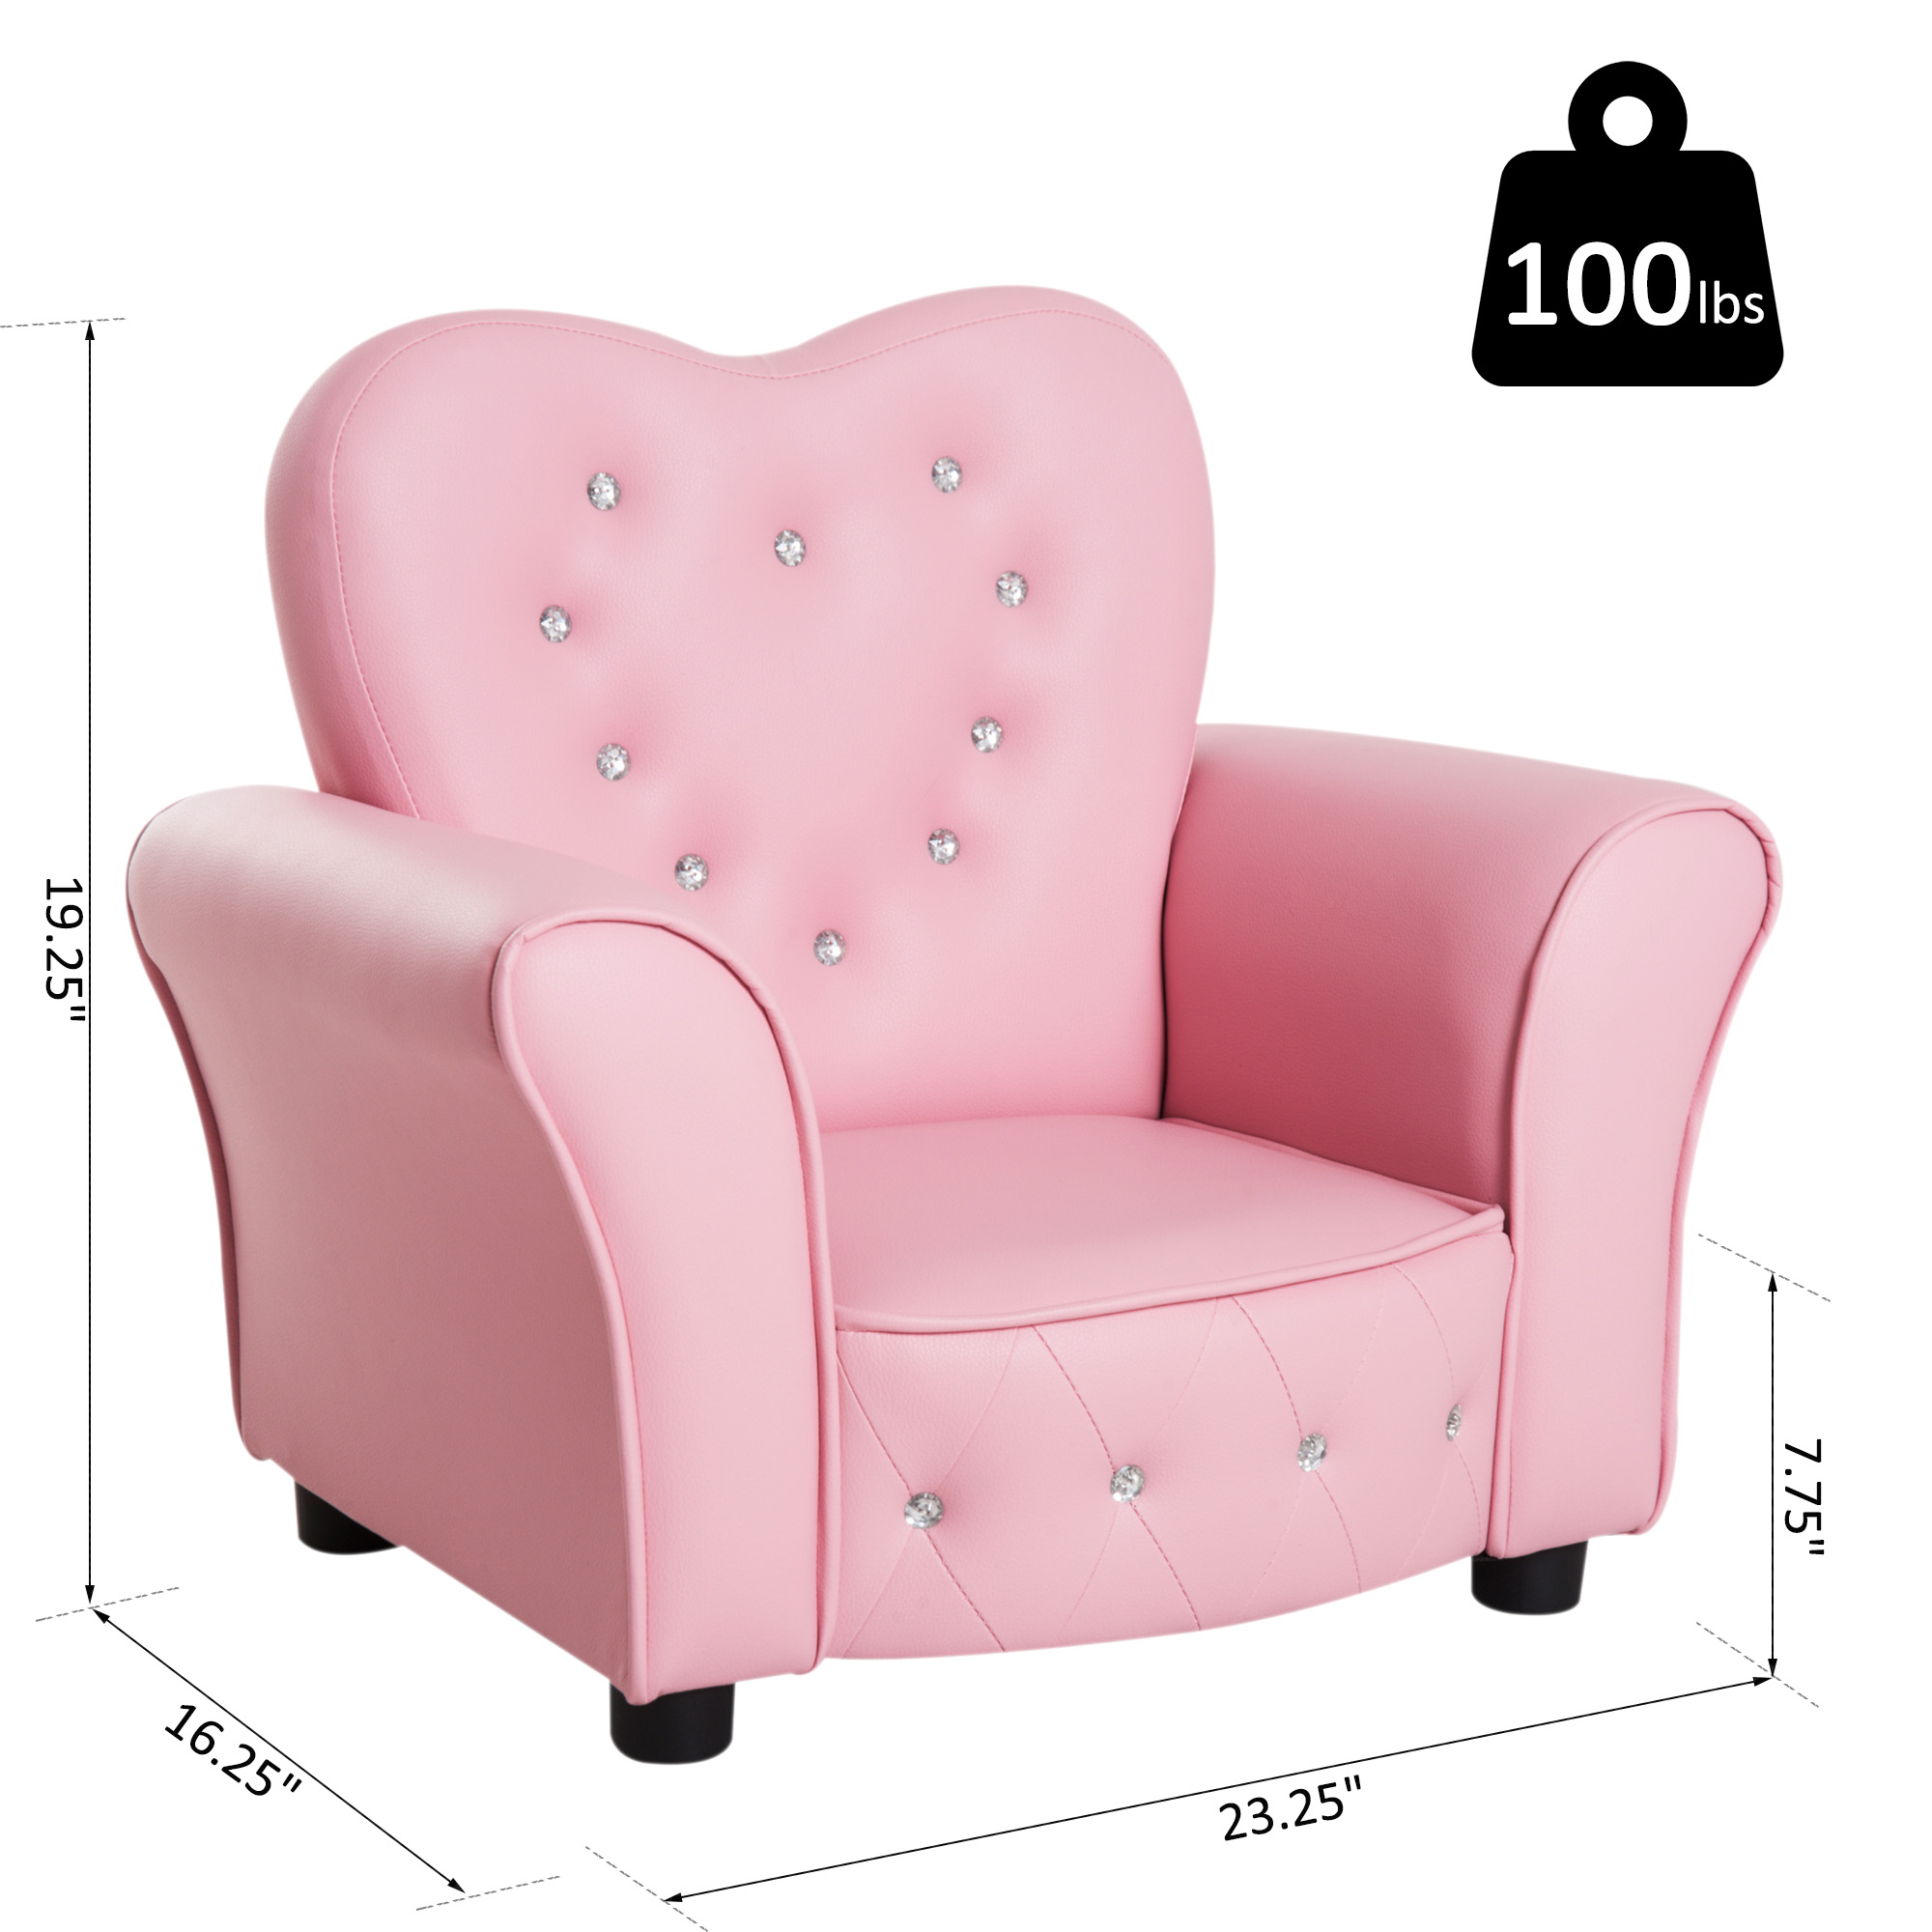 Qaba Kids Sofa Toddler Tufted Upholstered Sofa Chair Princess Couch Furniture with Diamond Decoration for Preschool Child, Pink - image 8 of 9